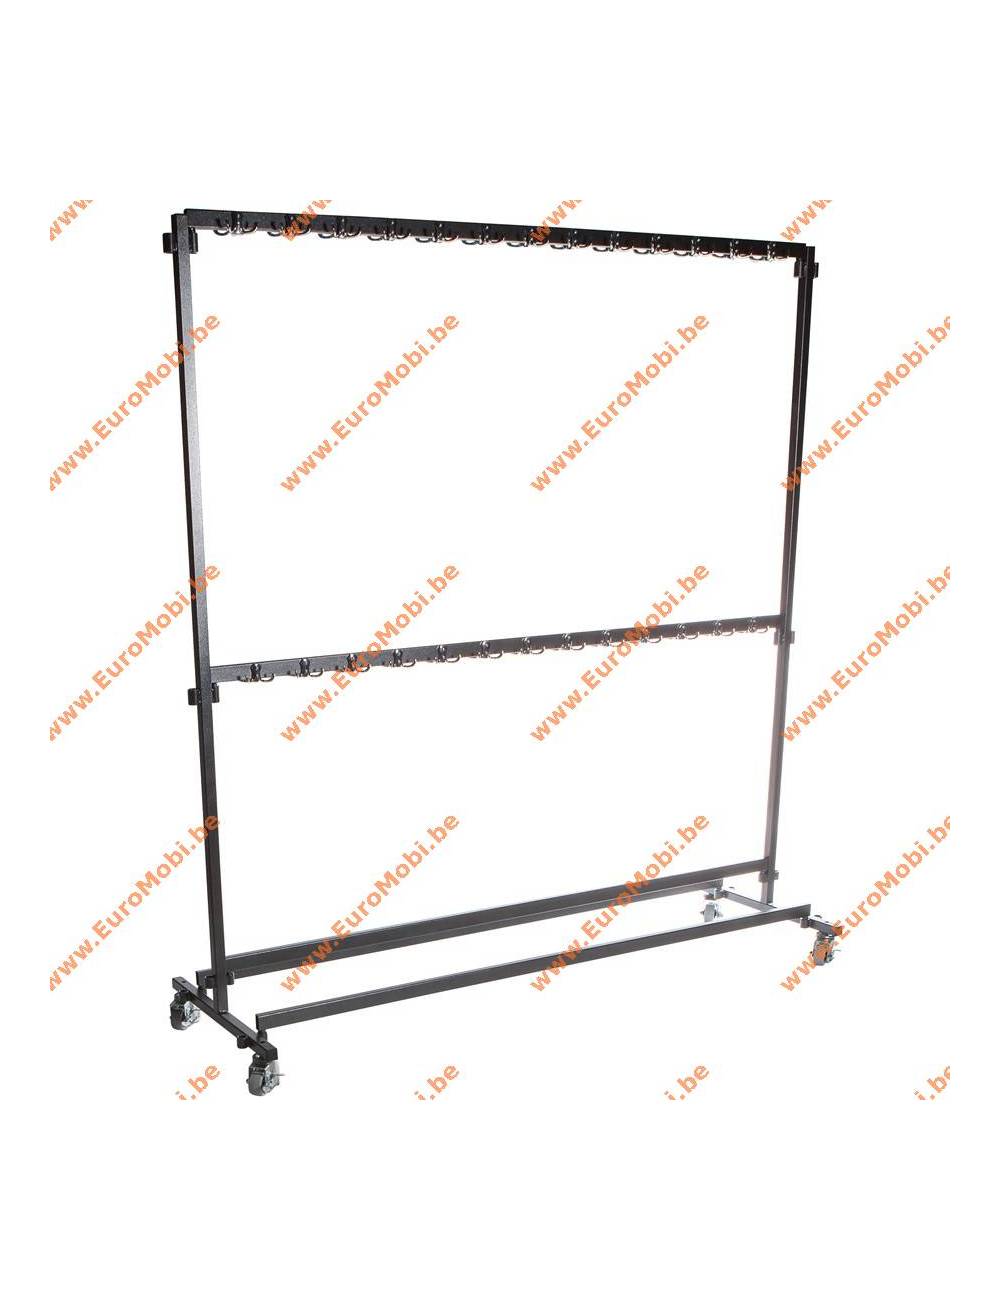 Clothes rack (with hooks) large